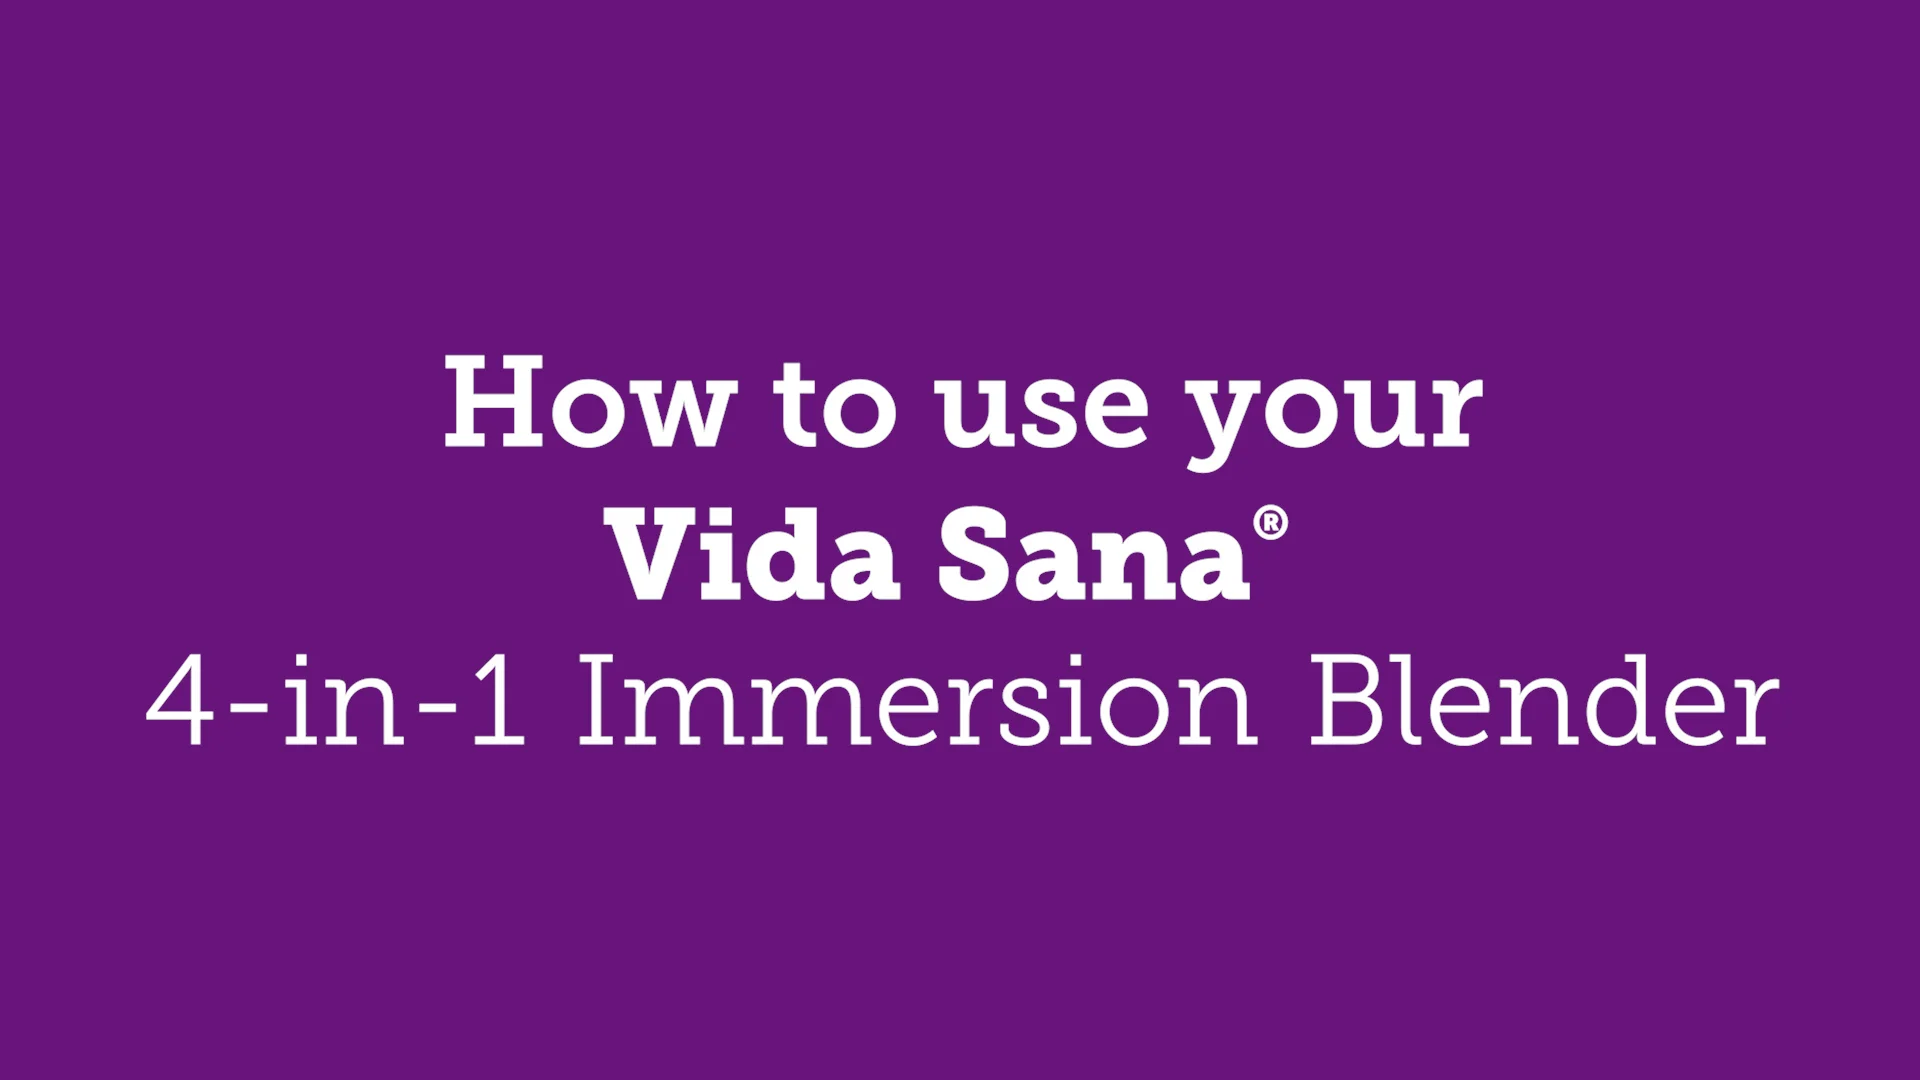 Vida Sana Immersion Blender Sizzle, 𝗩𝗶𝗱𝗮 𝗦𝗮𝗻𝗮 𝟰-𝗶𝗻-𝟭  𝗜𝗺𝗺𝗲𝗿𝘀𝗶𝗼𝗻 𝗕𝗹𝗲𝗻𝗱𝗲𝗿 - Blend, mash, whip and chop food with an  easy, one-hand operation. Powerful 400-watt motor features variable  speeds